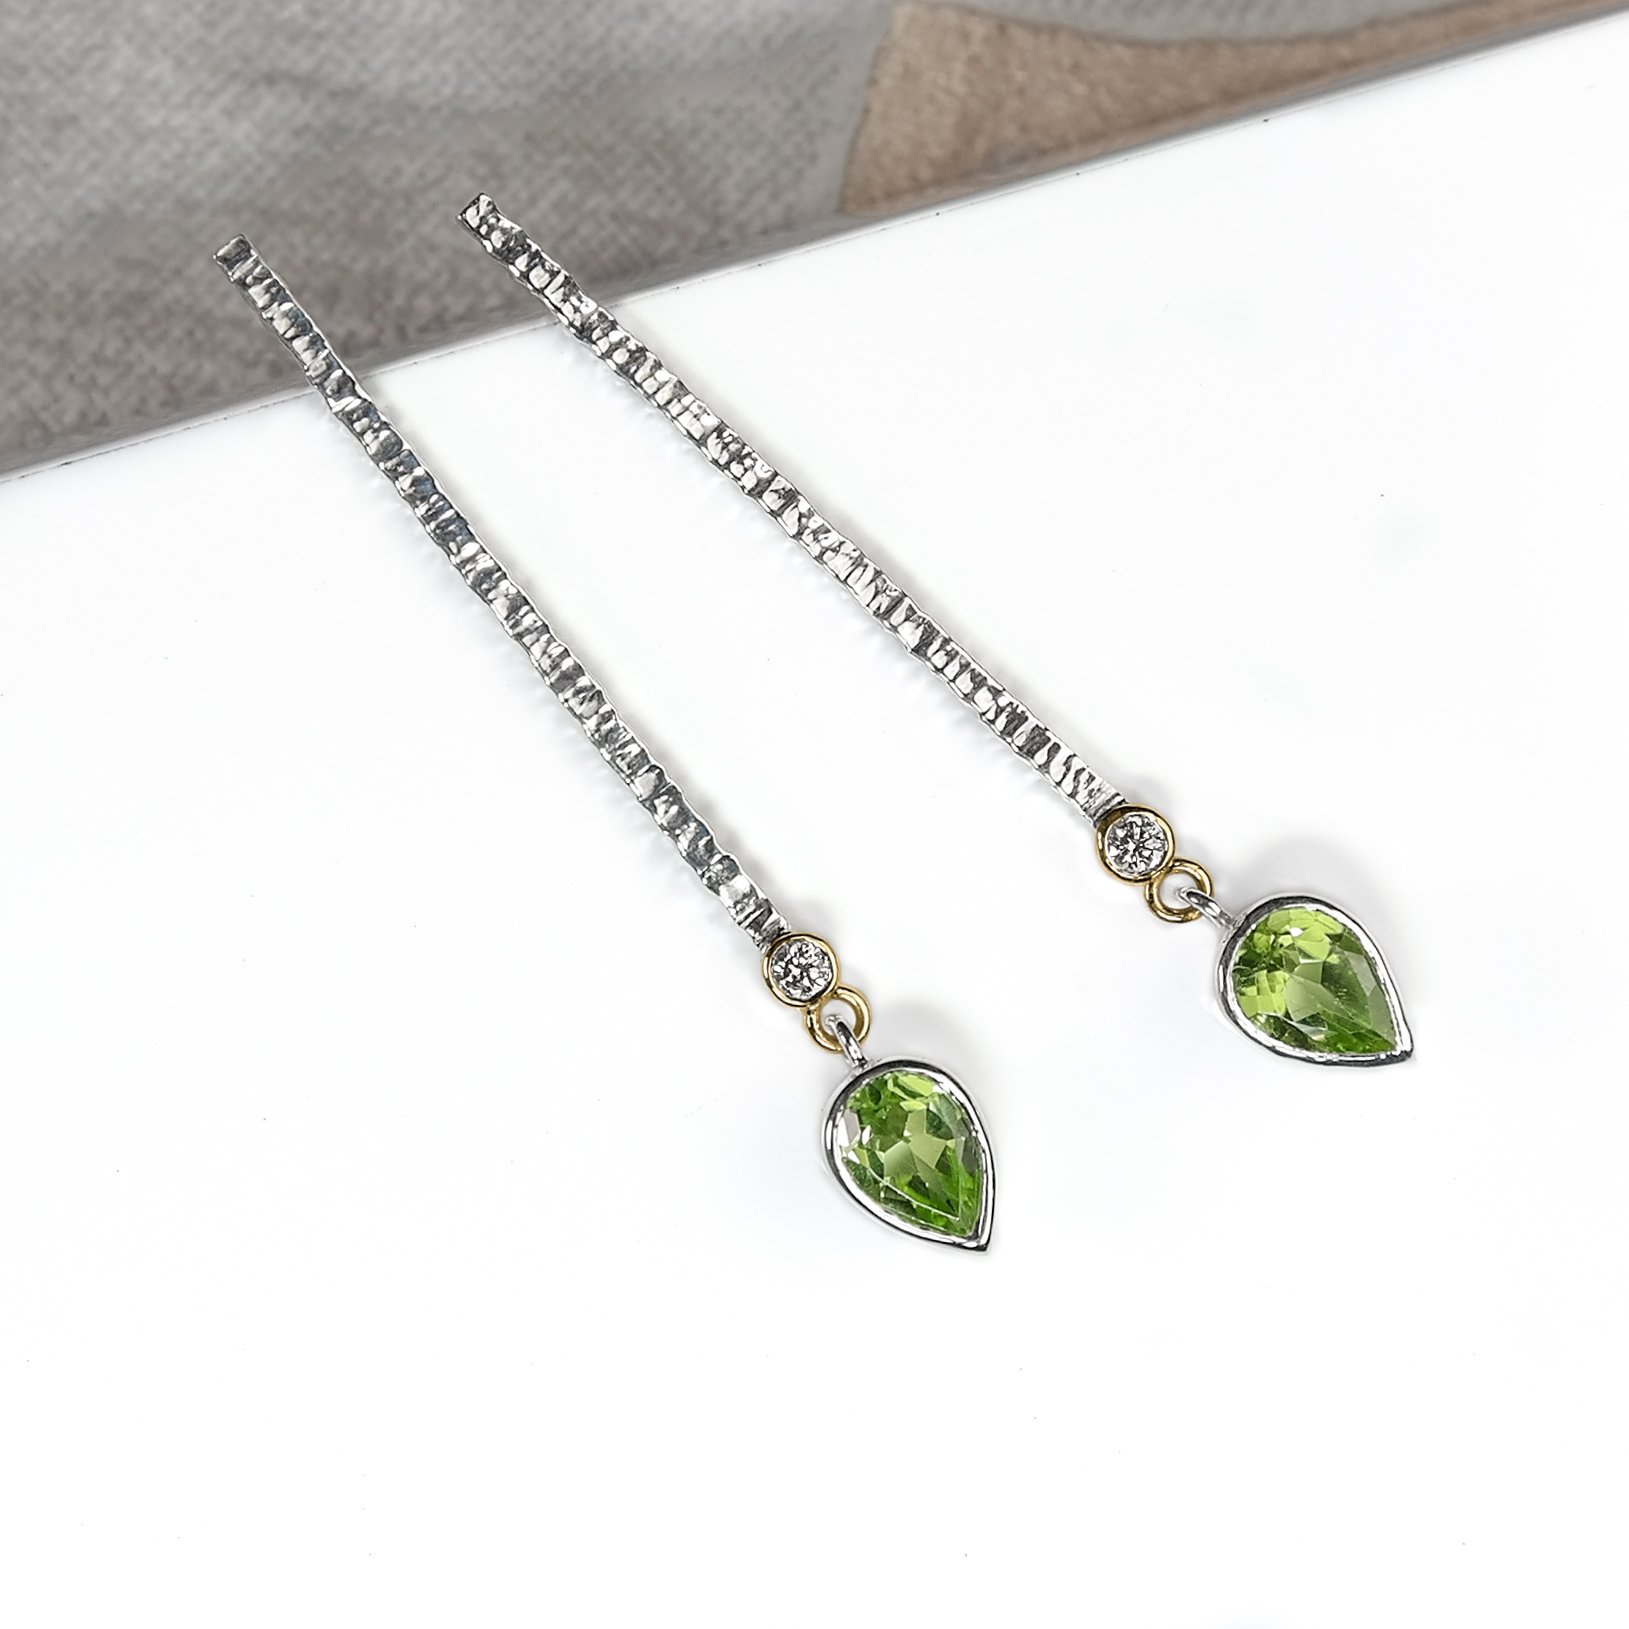 Recycled-silver-and-18ct-gold-earrings-with-ethical-peridot-august-birthstone.jpg